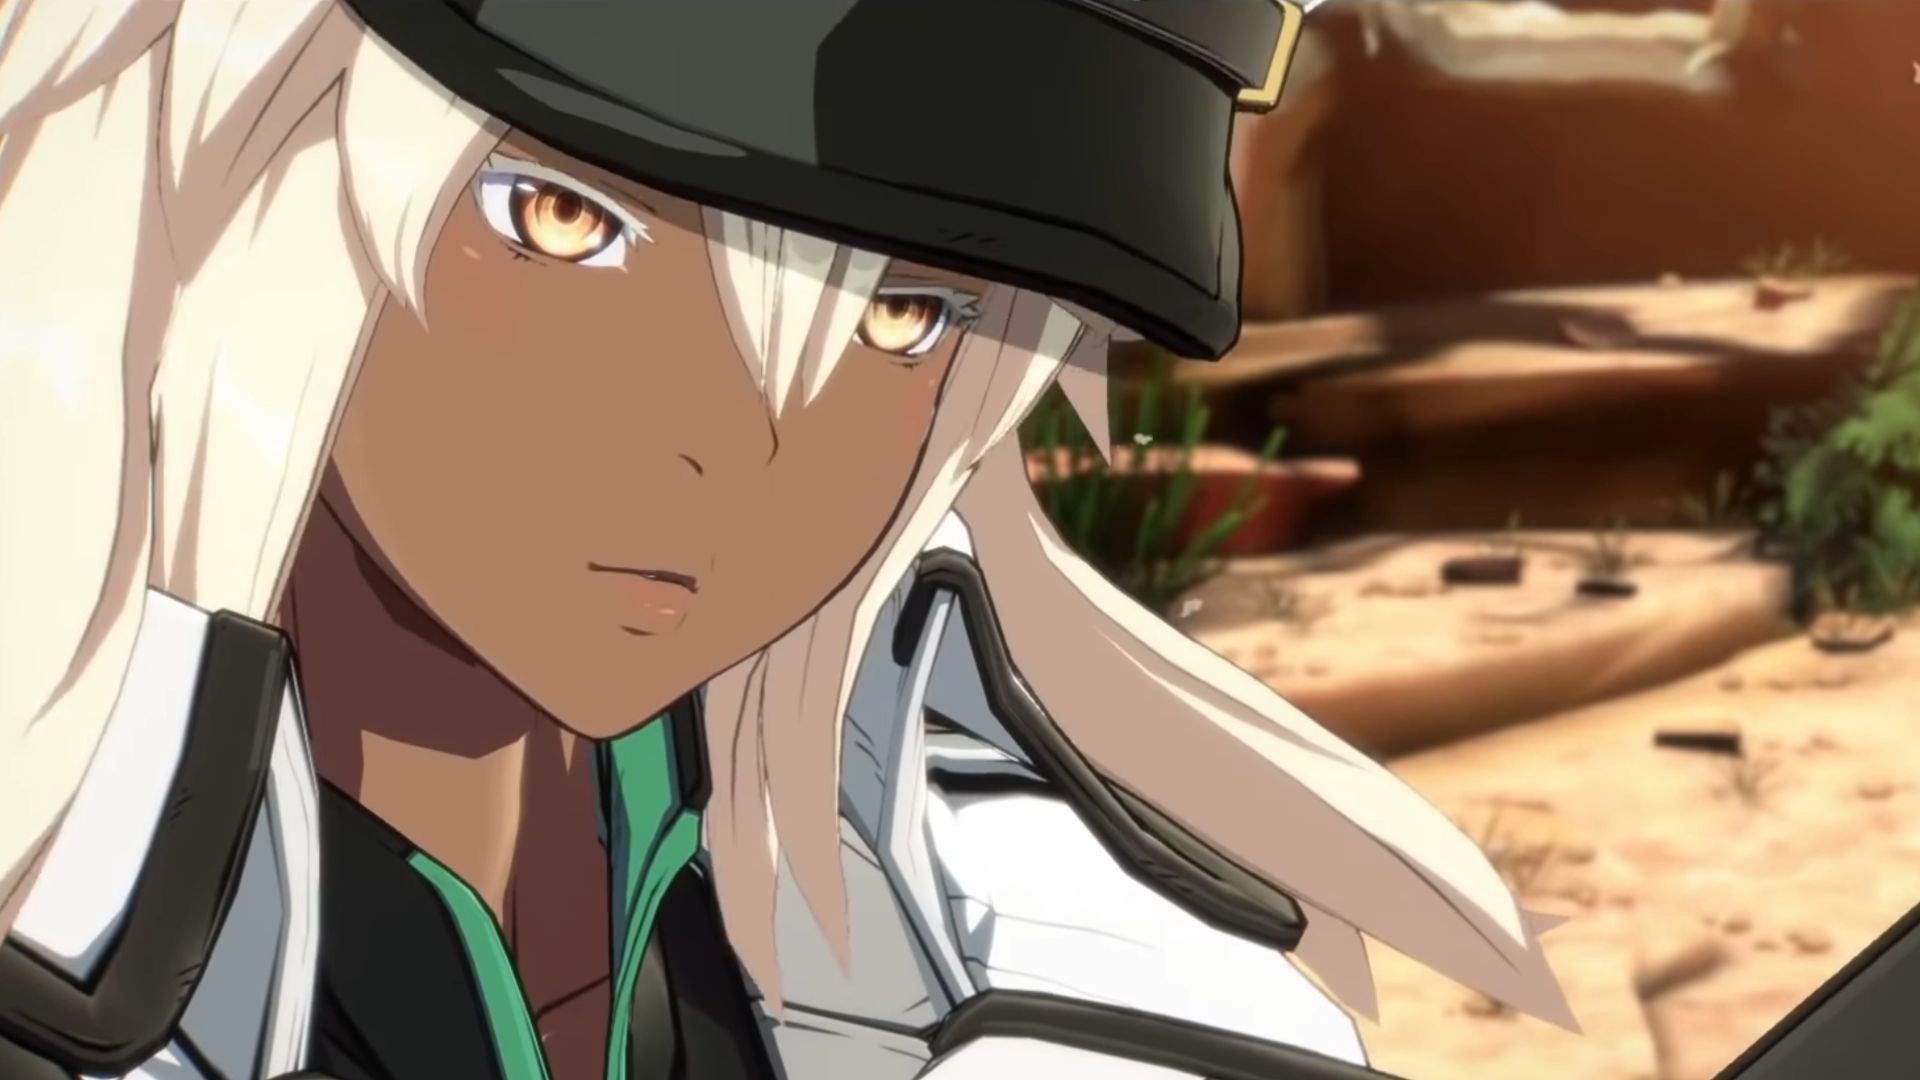 Guilty Gear voice actress steps down to 'support more work for Black actresses'